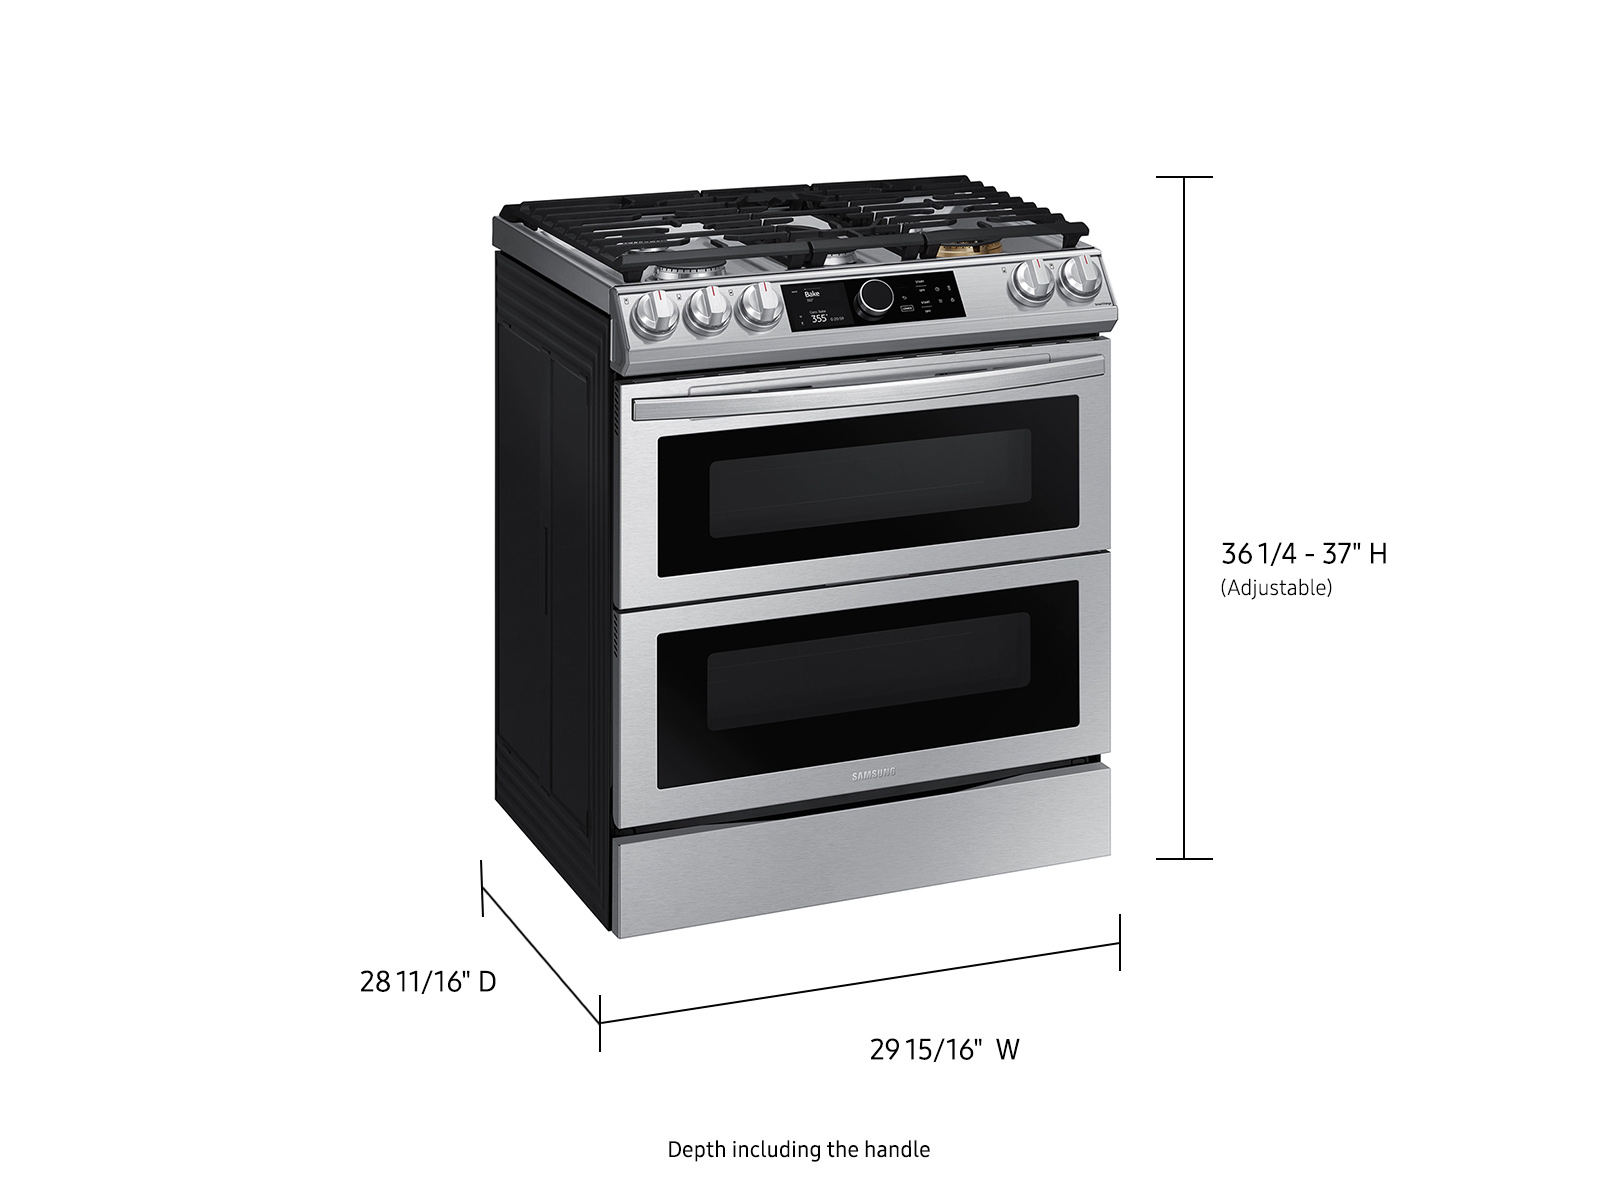 Samsung 30 in. 6.3 cu. ft. Smart Air Fry Convection Double Oven Slide-In  Dual Fuel Range with 5 Sealed Burners & Griddle - Black with Stainless Steel